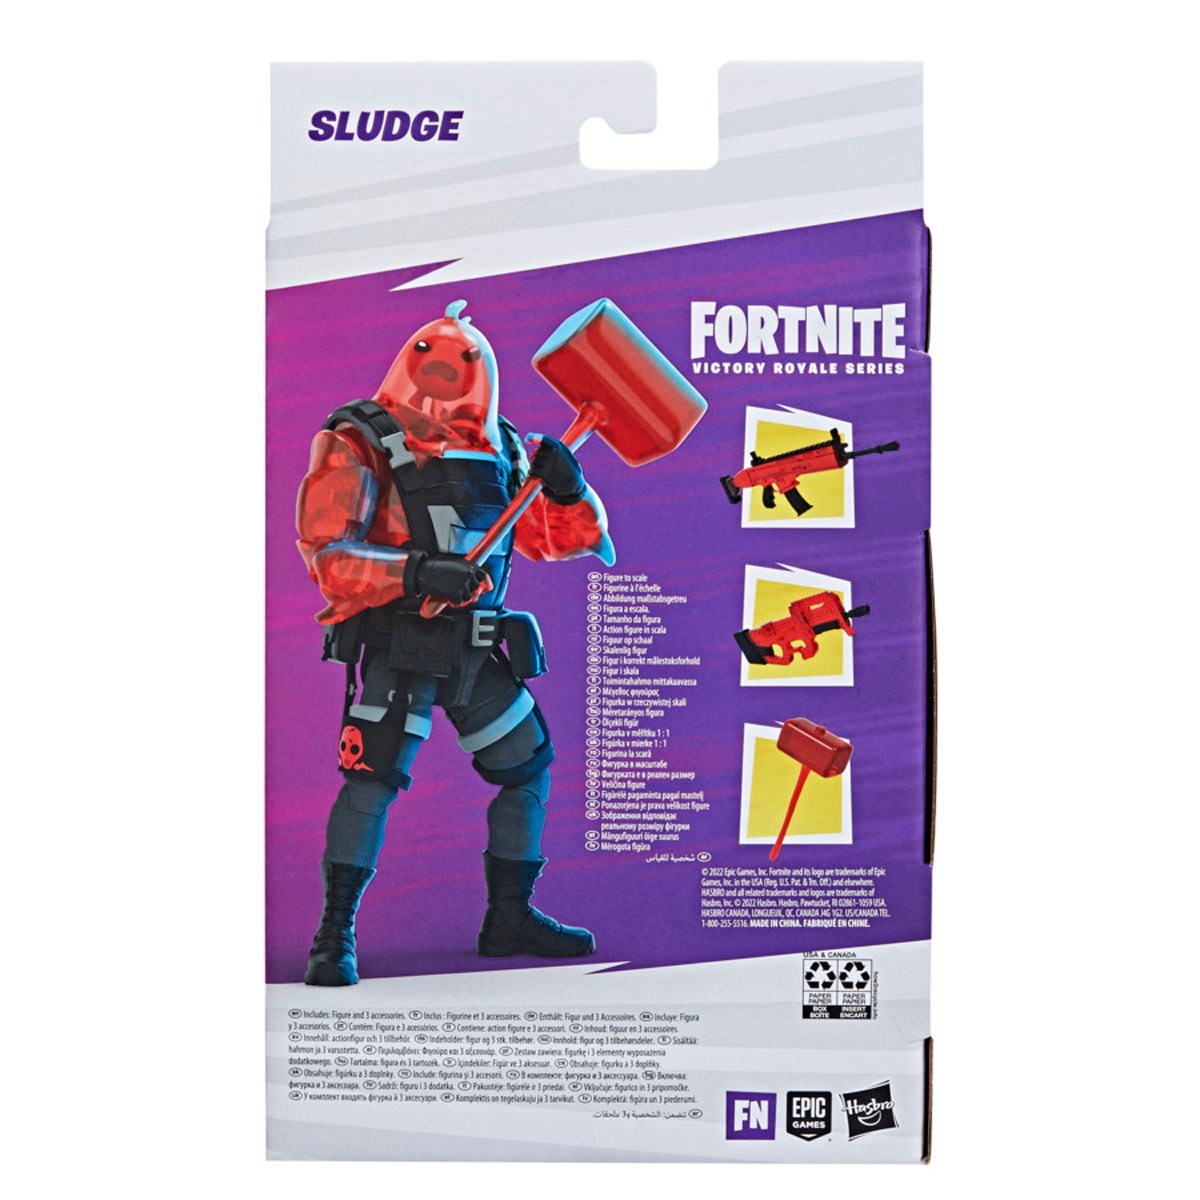 Fortnite guide: the best gaming accessories for victory royales